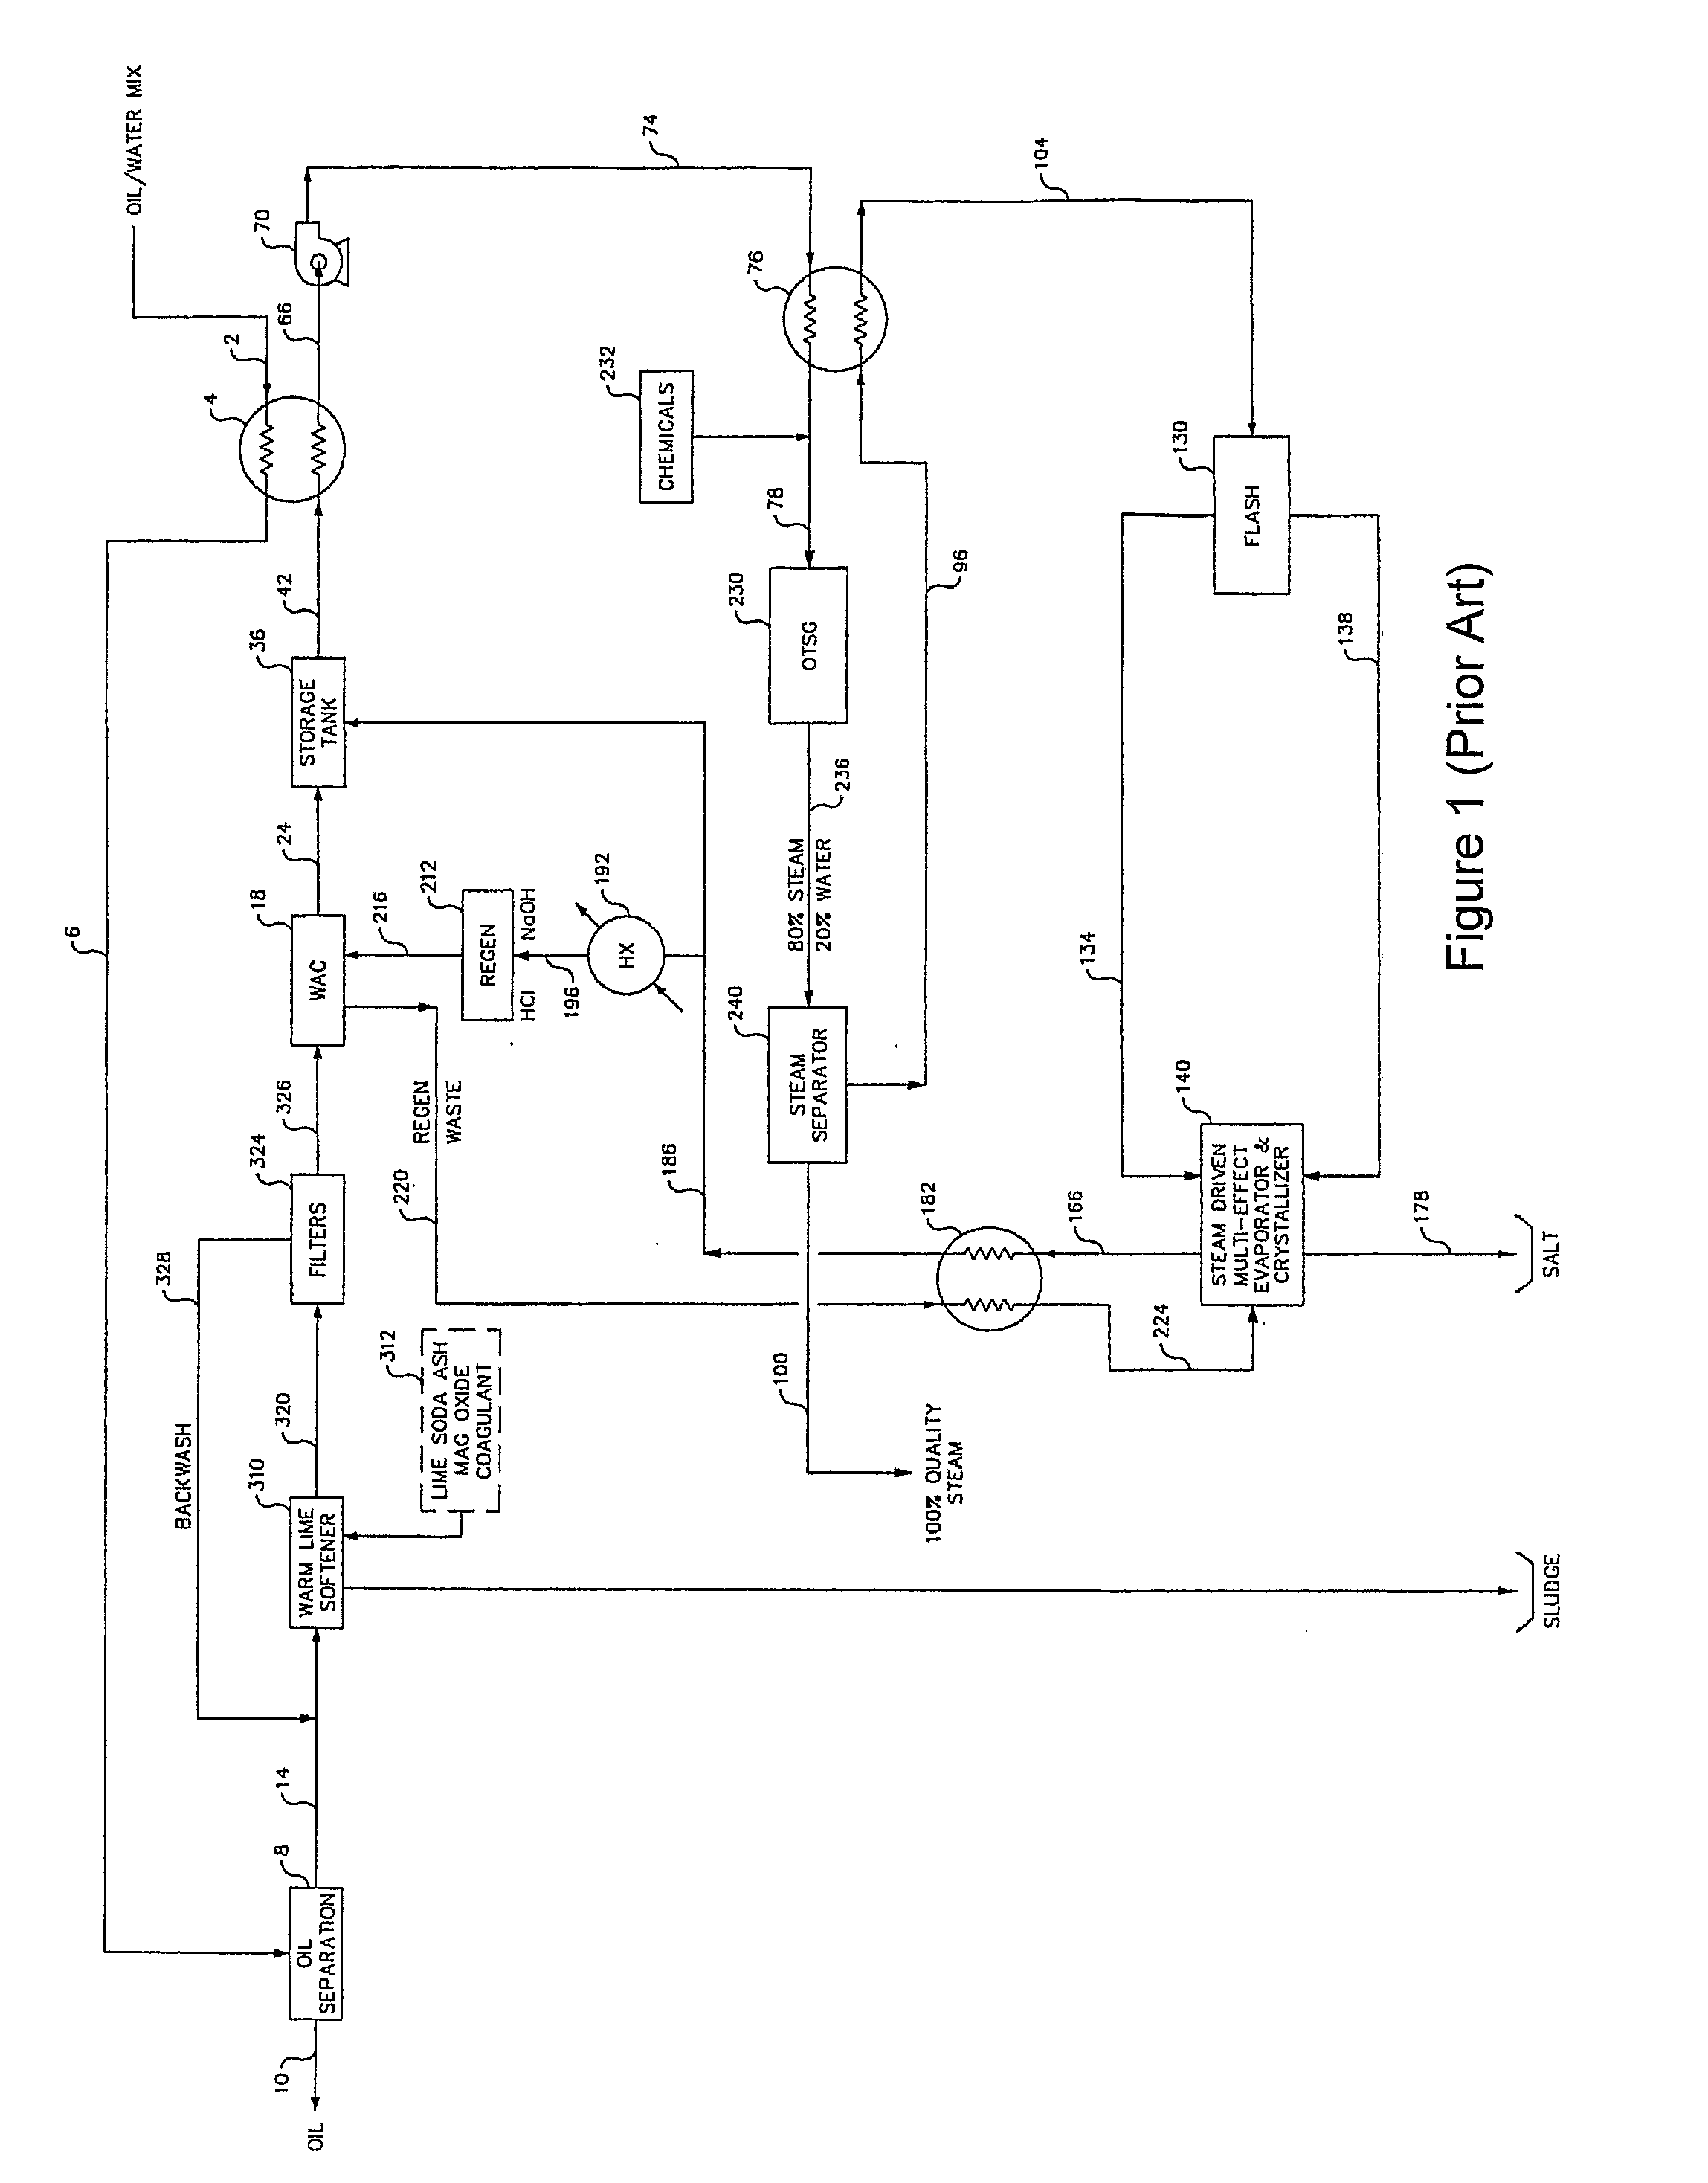 Method for Production of High Pressure Steam from Produced Water